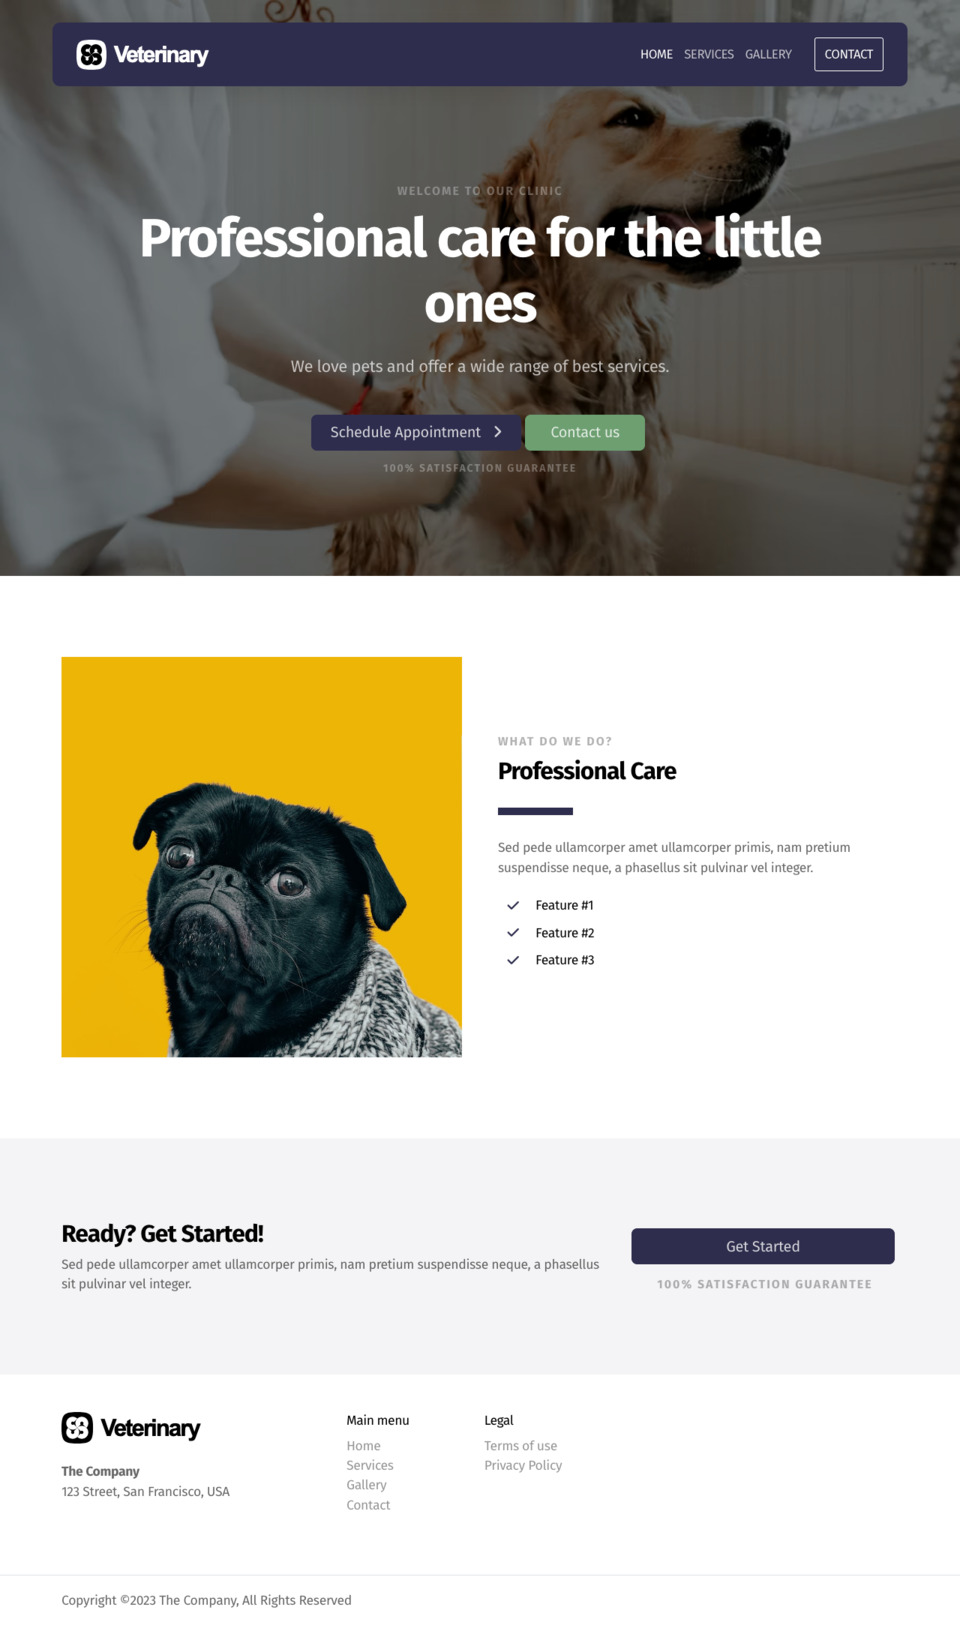 Veterinary Clinic Website Template - Perfect for veterinarians, pet care services, animal hospitals, and pet enthusiasts looking to create a beautiful and functional website without any coding skills.